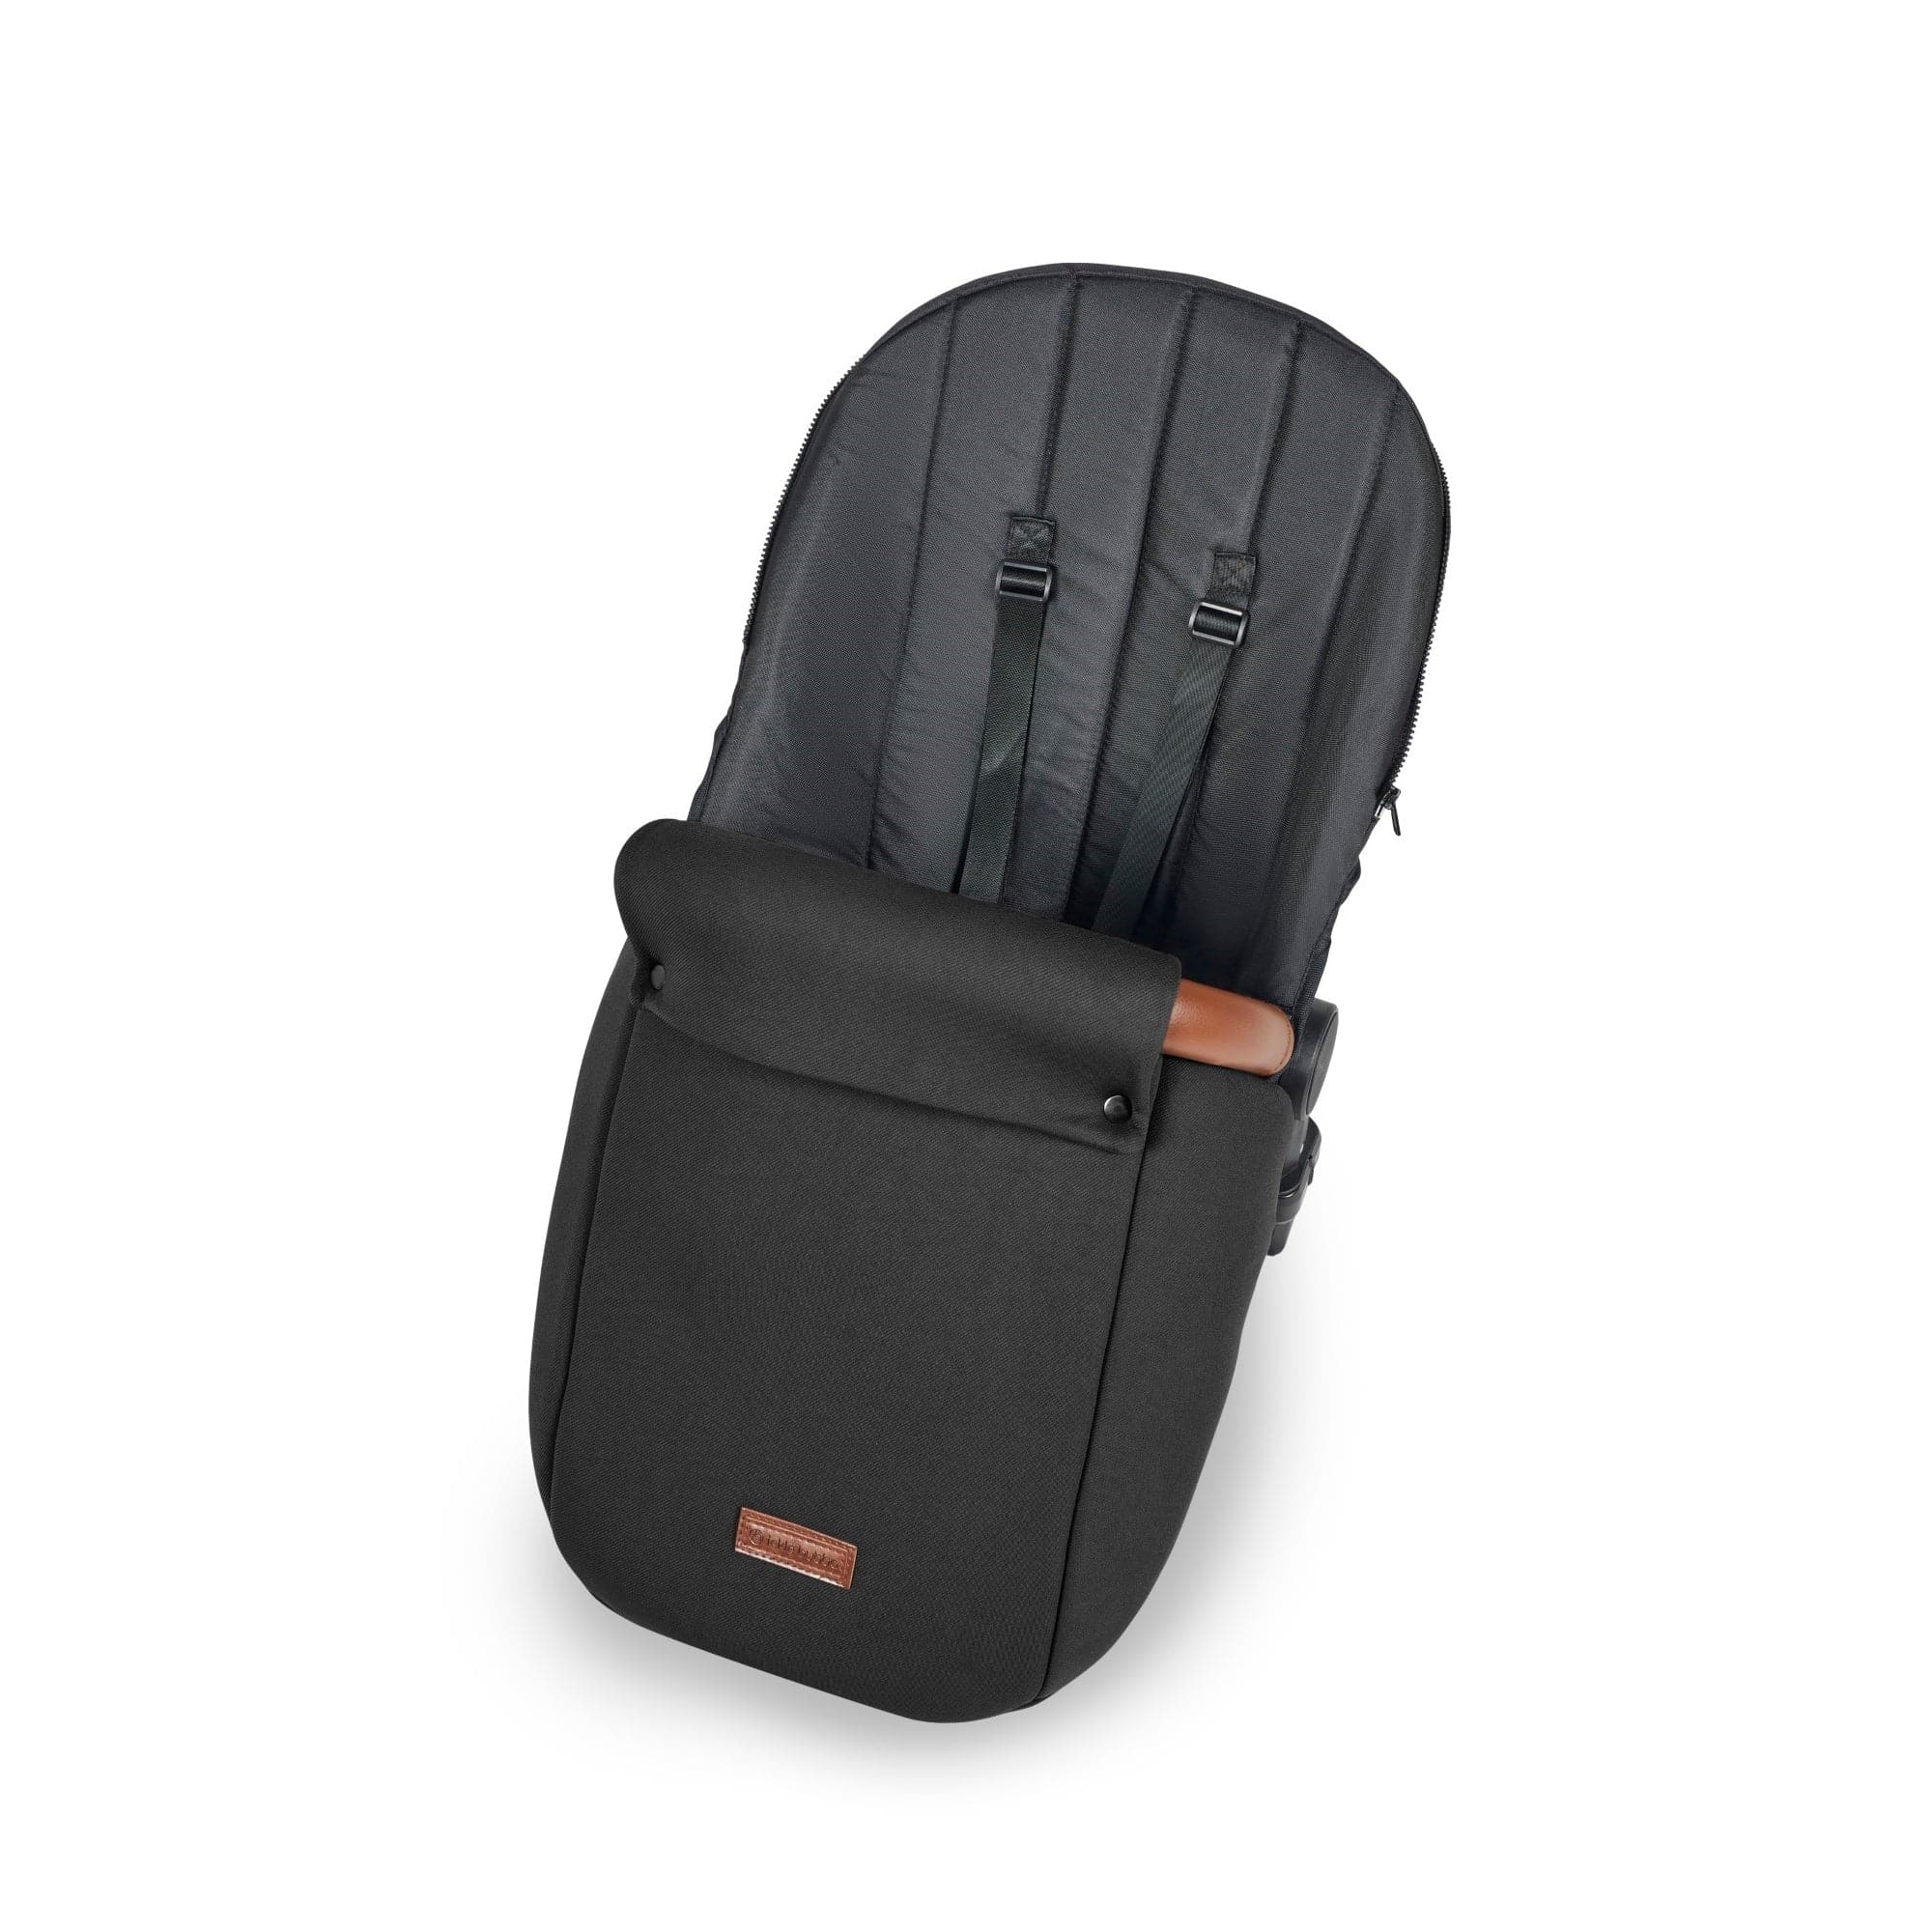 Ickle Bubba Stomp Luxe All-in-One I-Size Travel System With Isofix Base - Black / Midnight / Tan -  | For Your Little One